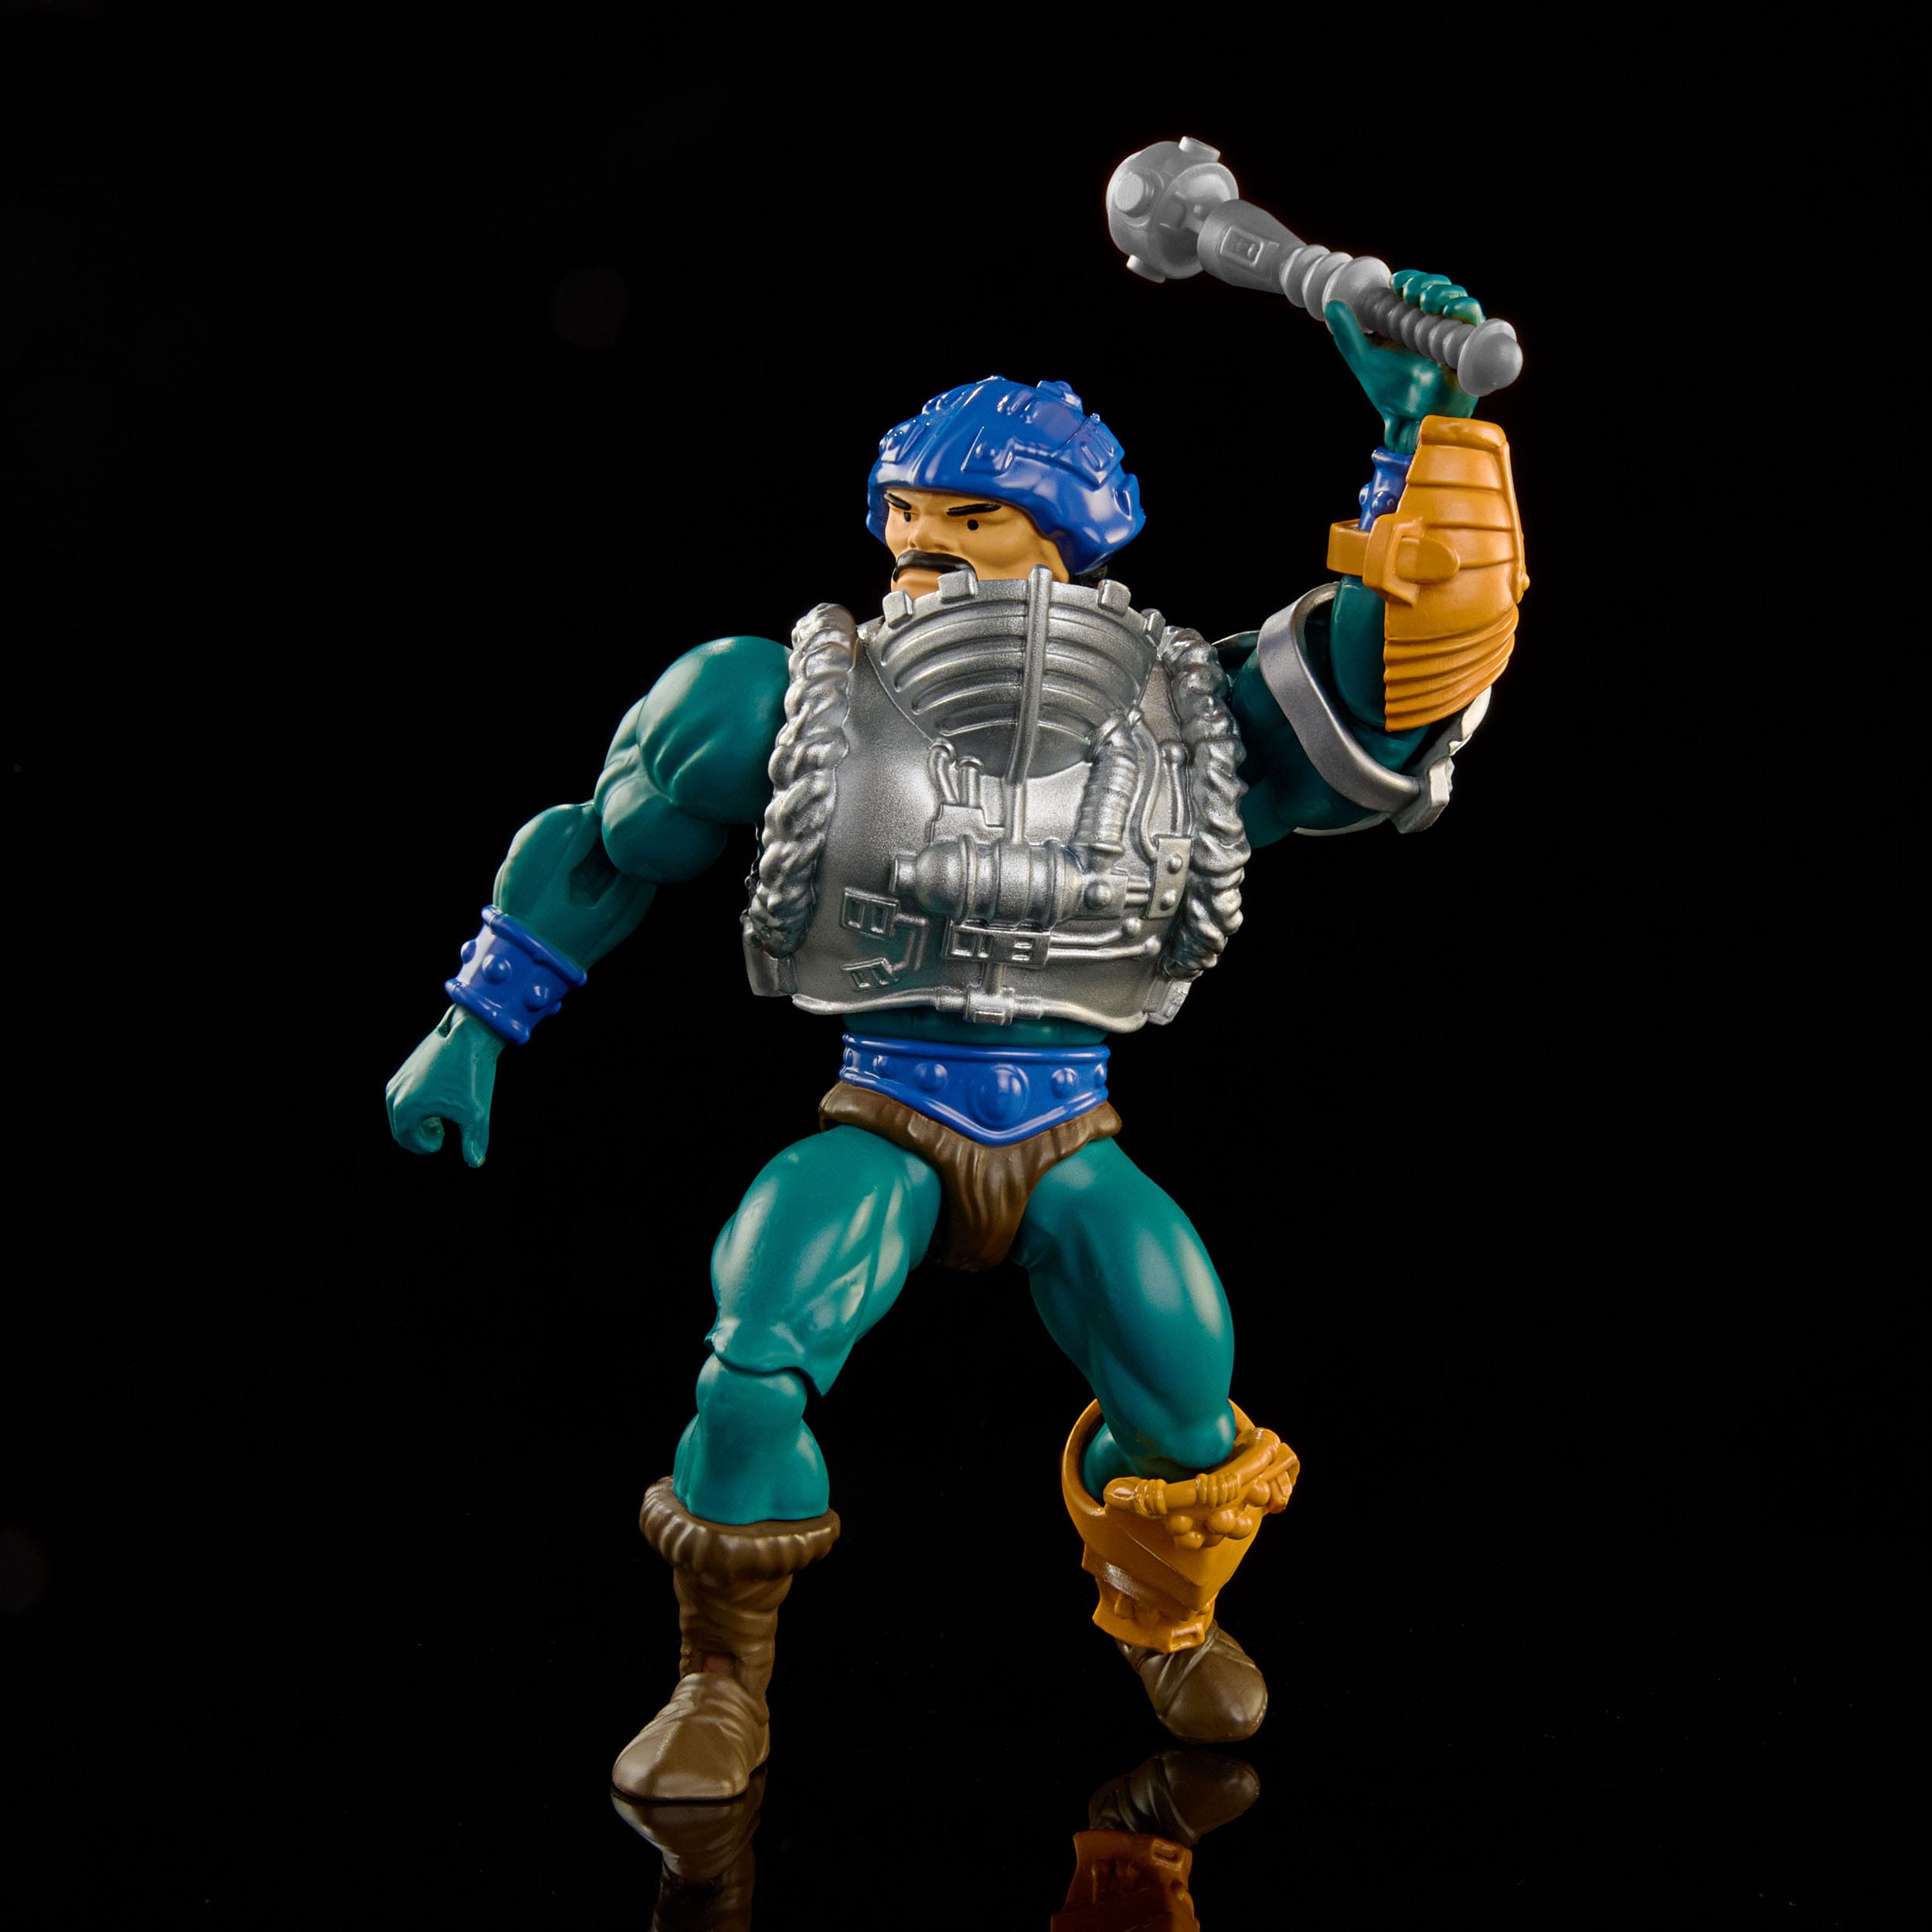 Masters of the Universe Origins Actionfigur Serpent Claw Man-At-Arms 14 cm MATTHKM76 0194735104239